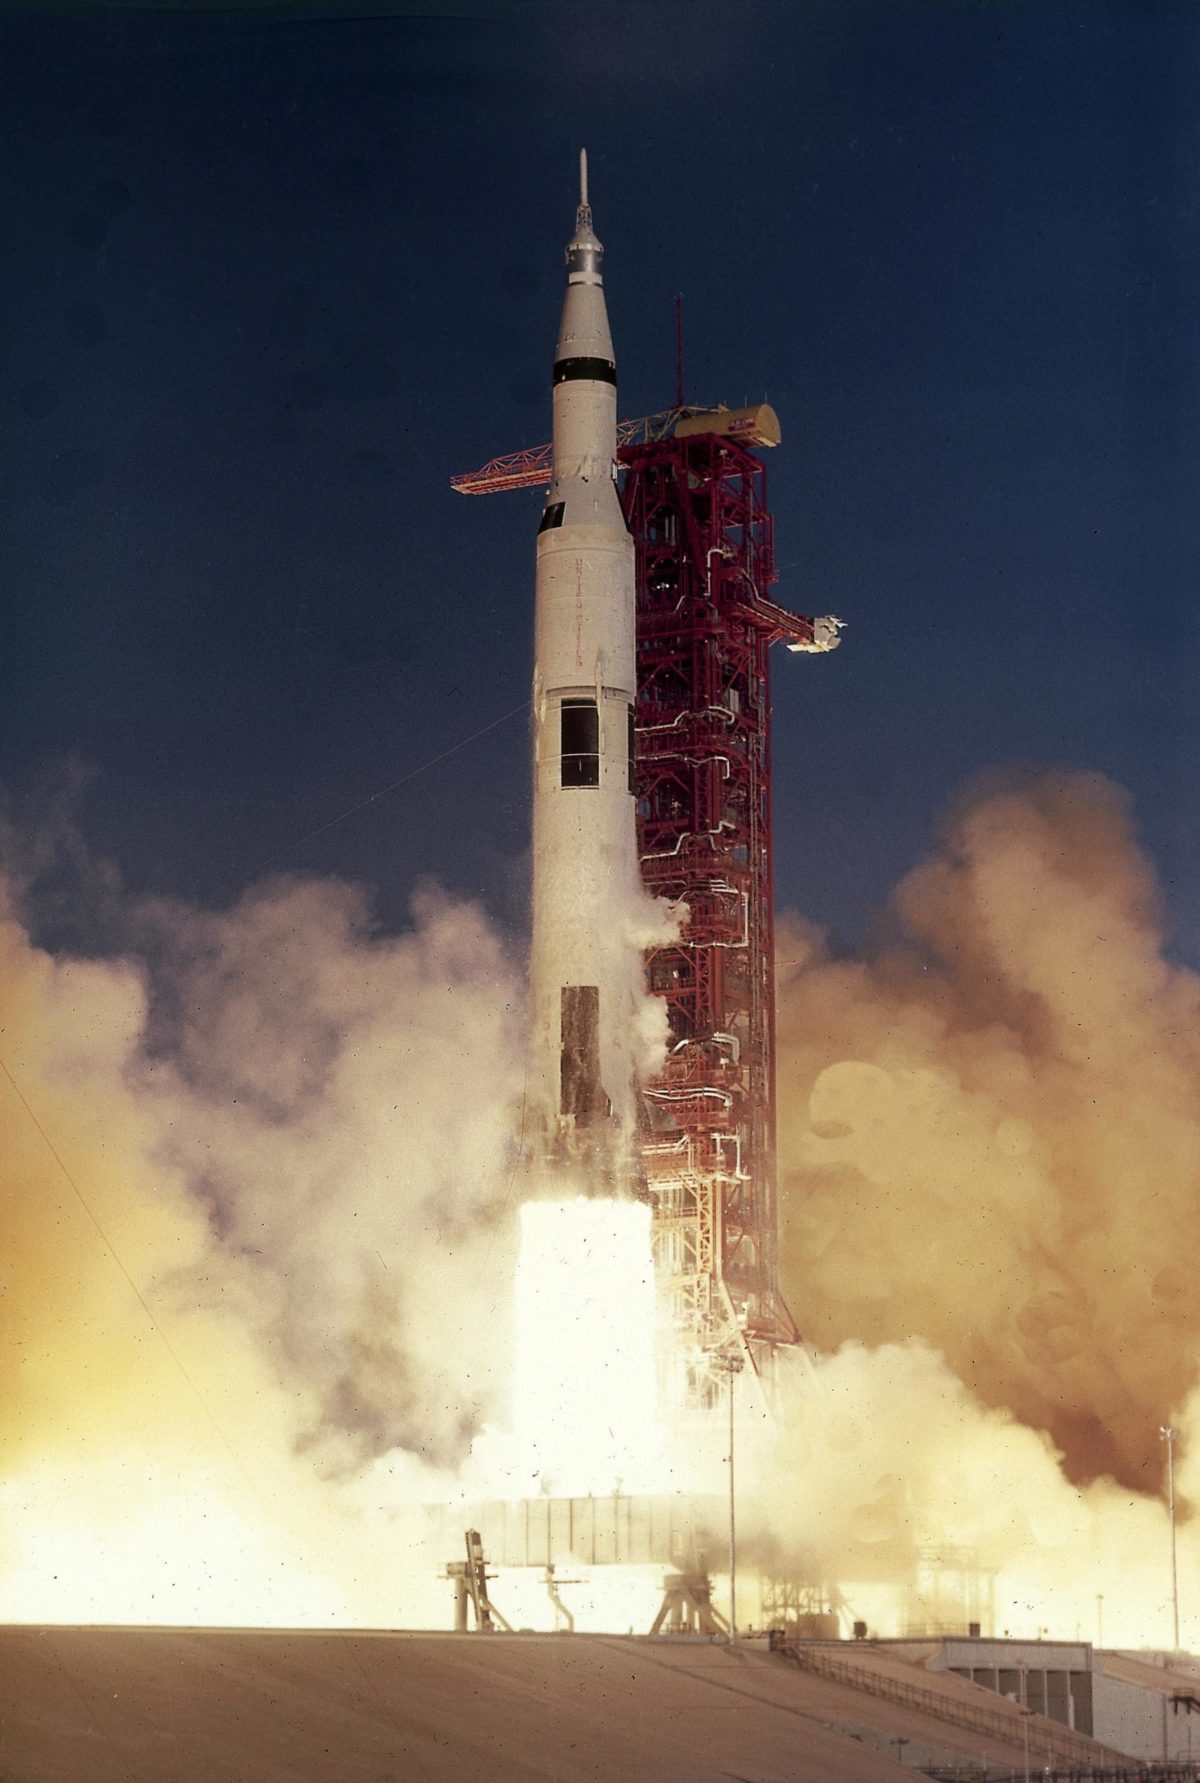 A Saturn V rocket carrying the Apollo 8 crew blasts off from Kennedy Space Center in Florida on Dec. 21, 1968. It was the first crewed mission to the moon.